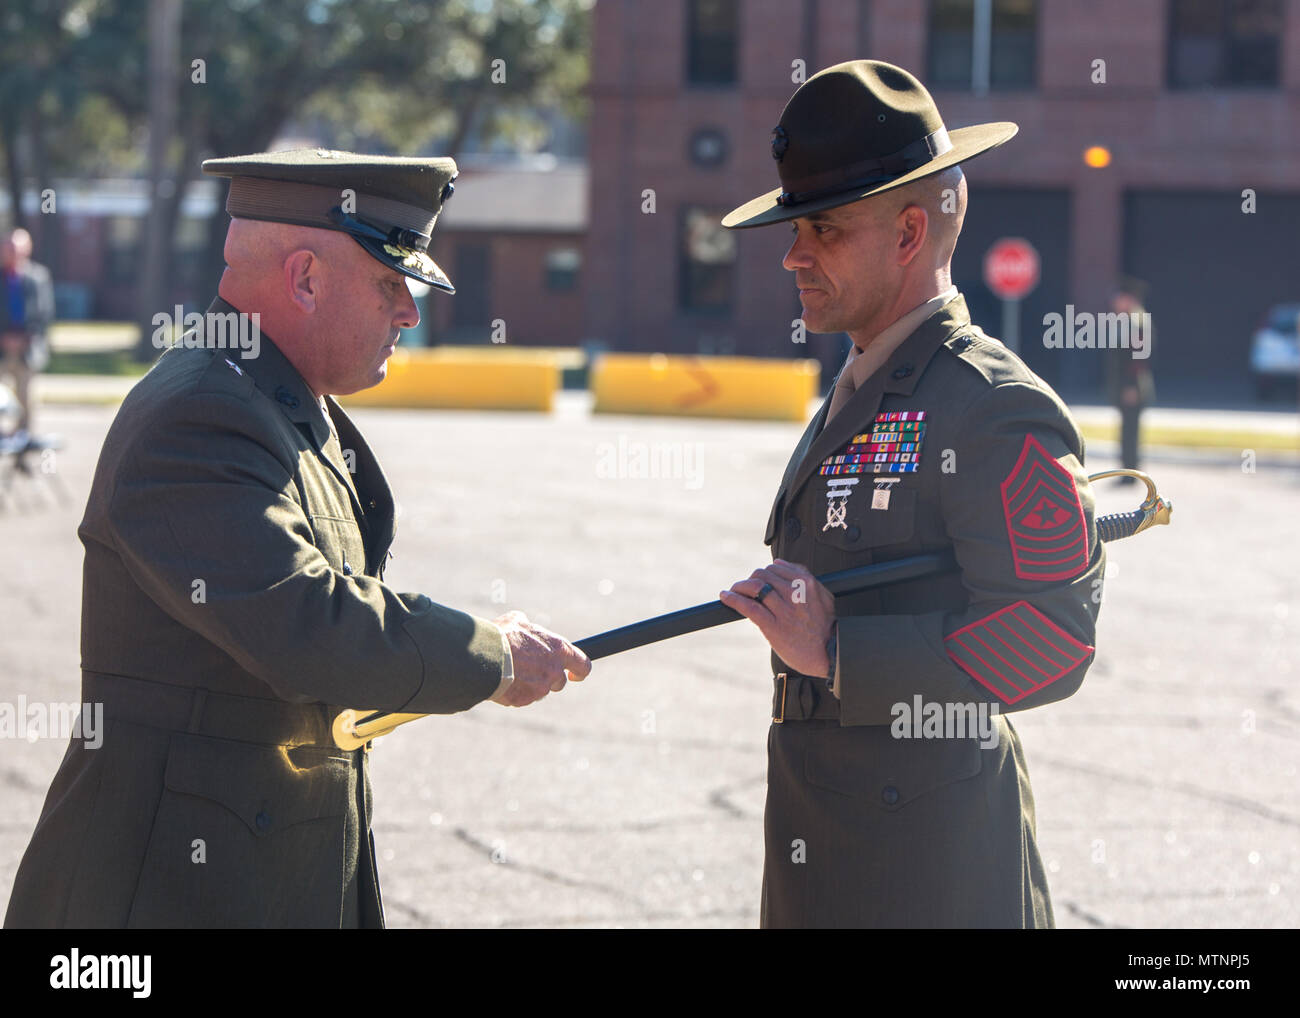 Sgt. Maj. Rafael Rodriguez accepts a noncommissioned officer sword from Brig. Gen. Austin E. Renforth, commanding general of Marine Corps Recruit Parris Island, S.C., on Jan. 13, 2017, during a relief and appointment ceremony for the Marine Corps Recruit Depot Parris Island and Eastern Recruiting Region sergeant major. The passing of the sword symbolizes the transfer of responsibilities and accountability from the outgoing senior-enlisted advisor to the incoming. Sgt. Maj. Angela M. Maness relinquished her post as the Marine Corps Recruit Depot Parris Island and Eastern Recruiting Region serge Stock Photo